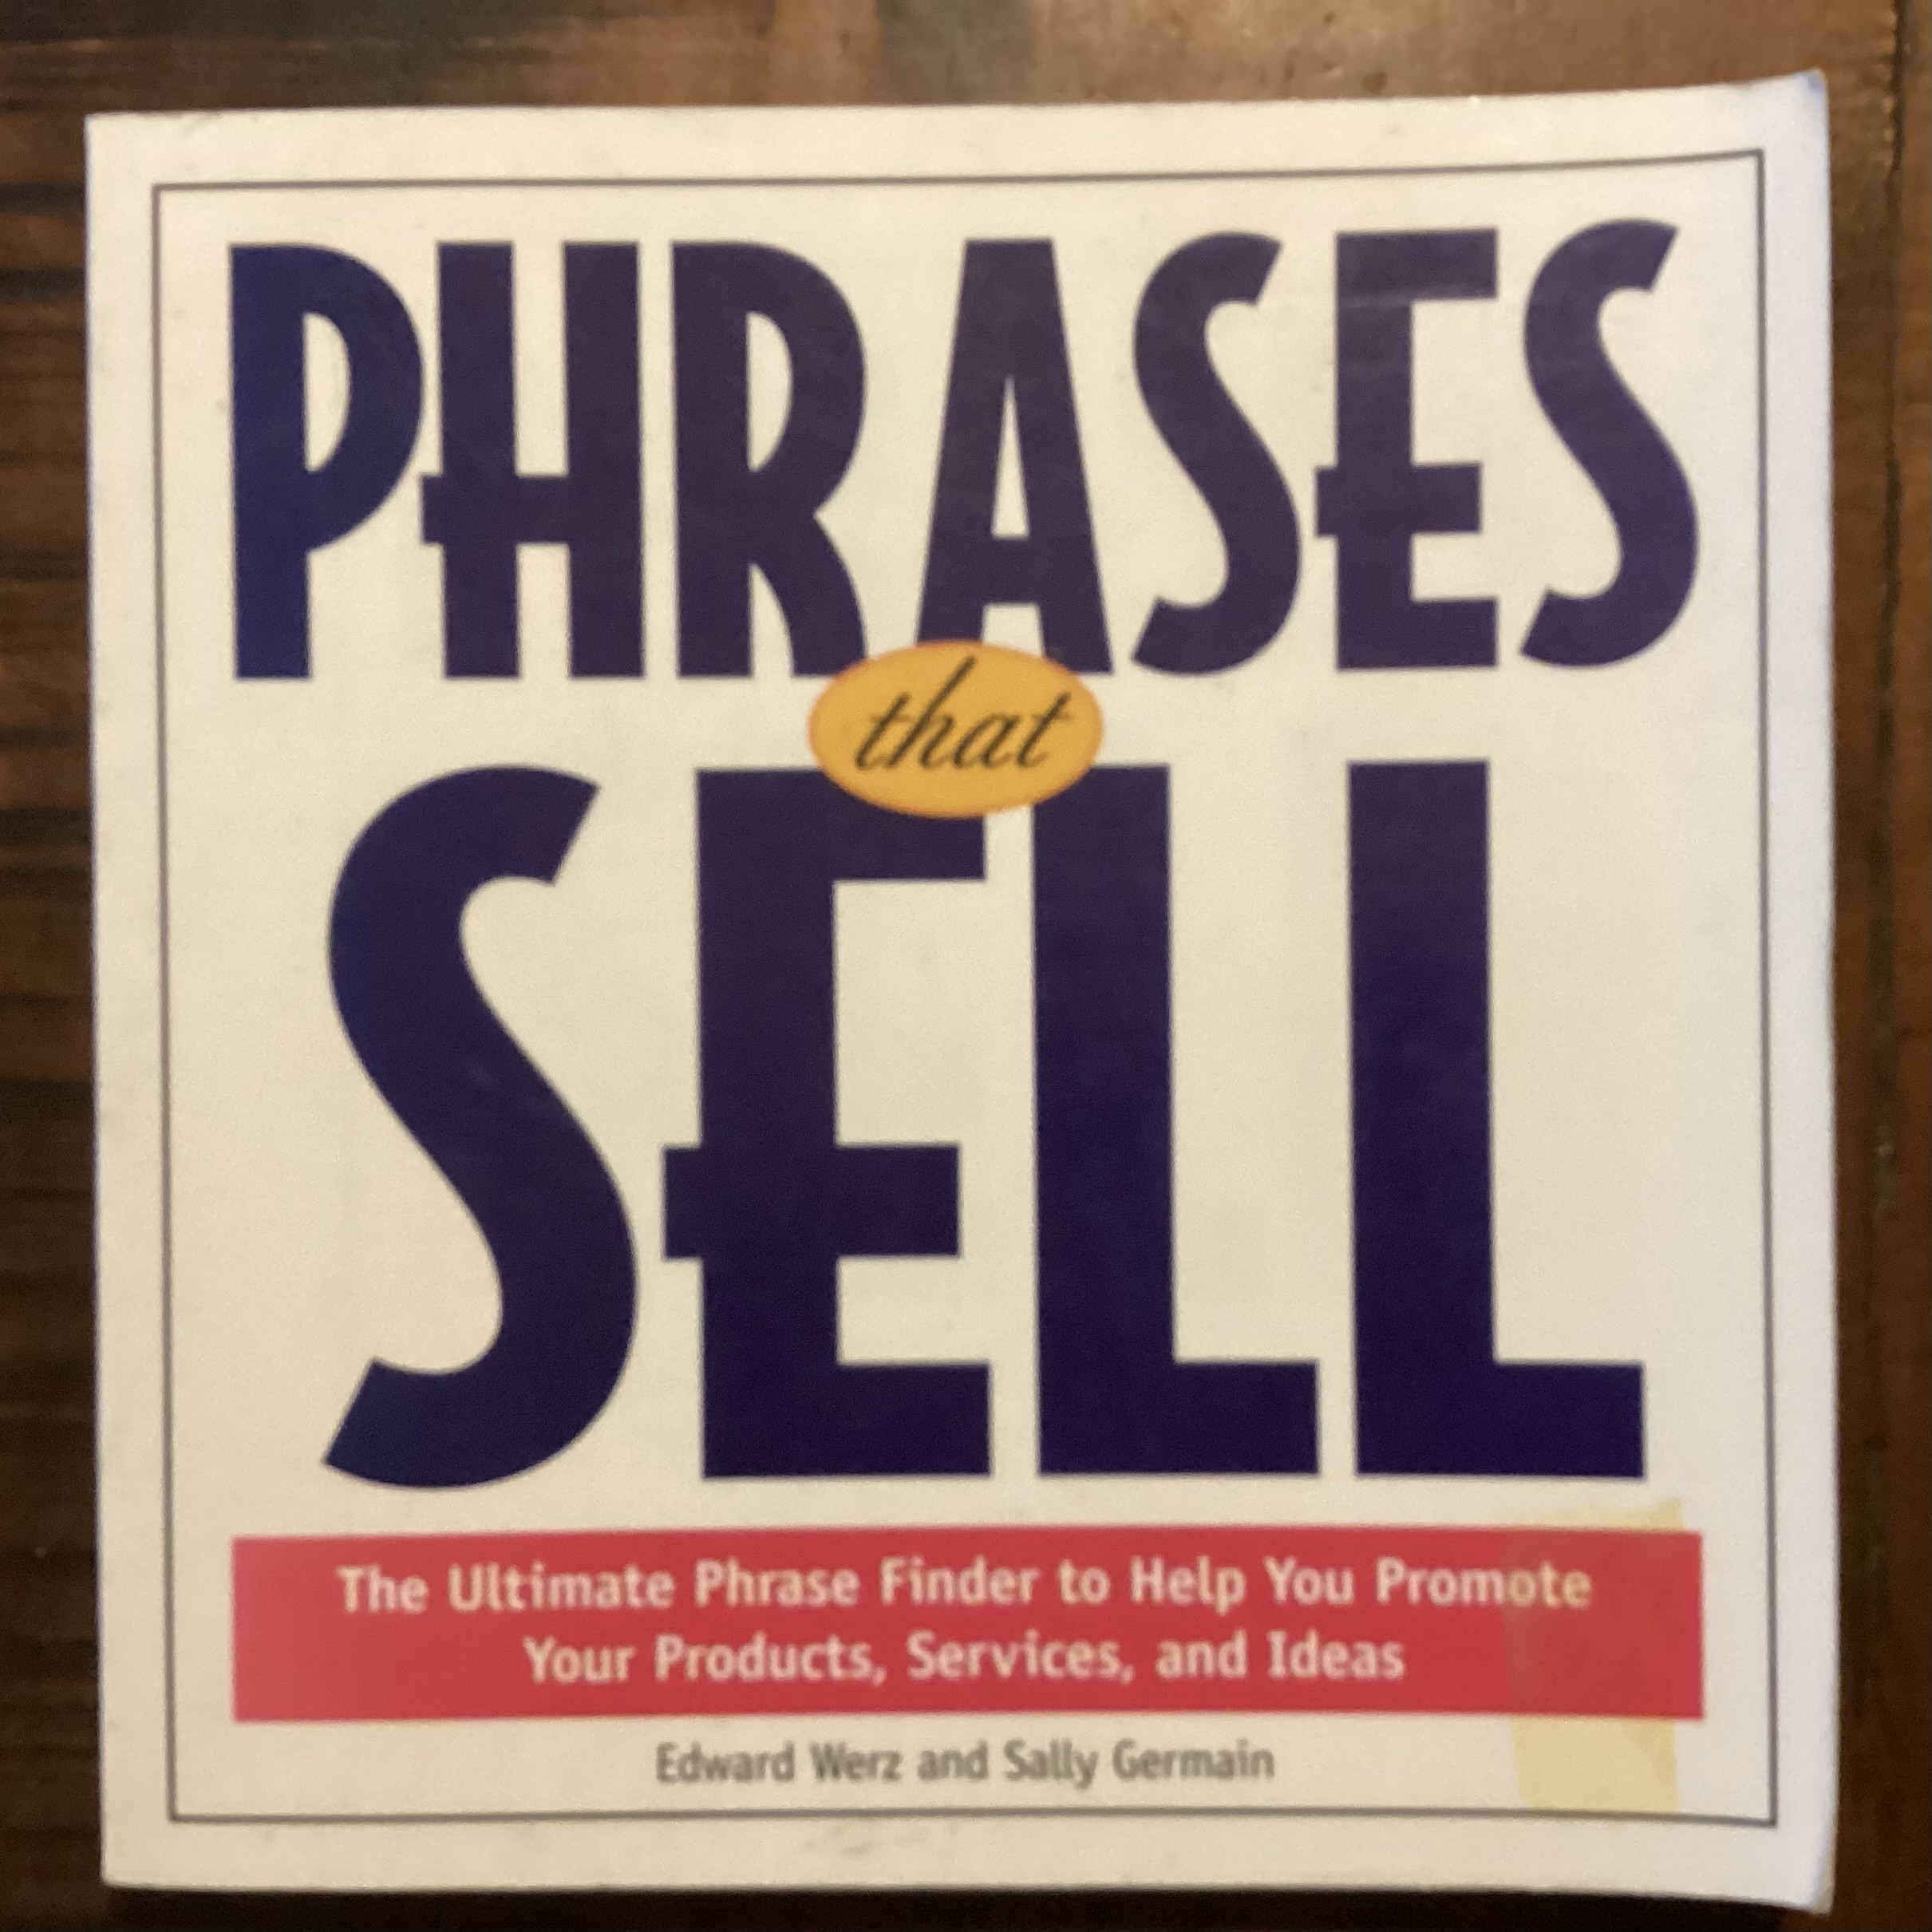 Phrases That Sell: The Ultimate Phrase Finder to Help You Promote Your Products, Services, and Ideas (BUSINESS BOOKS) - Werz, Edward W.; Germain, Sally